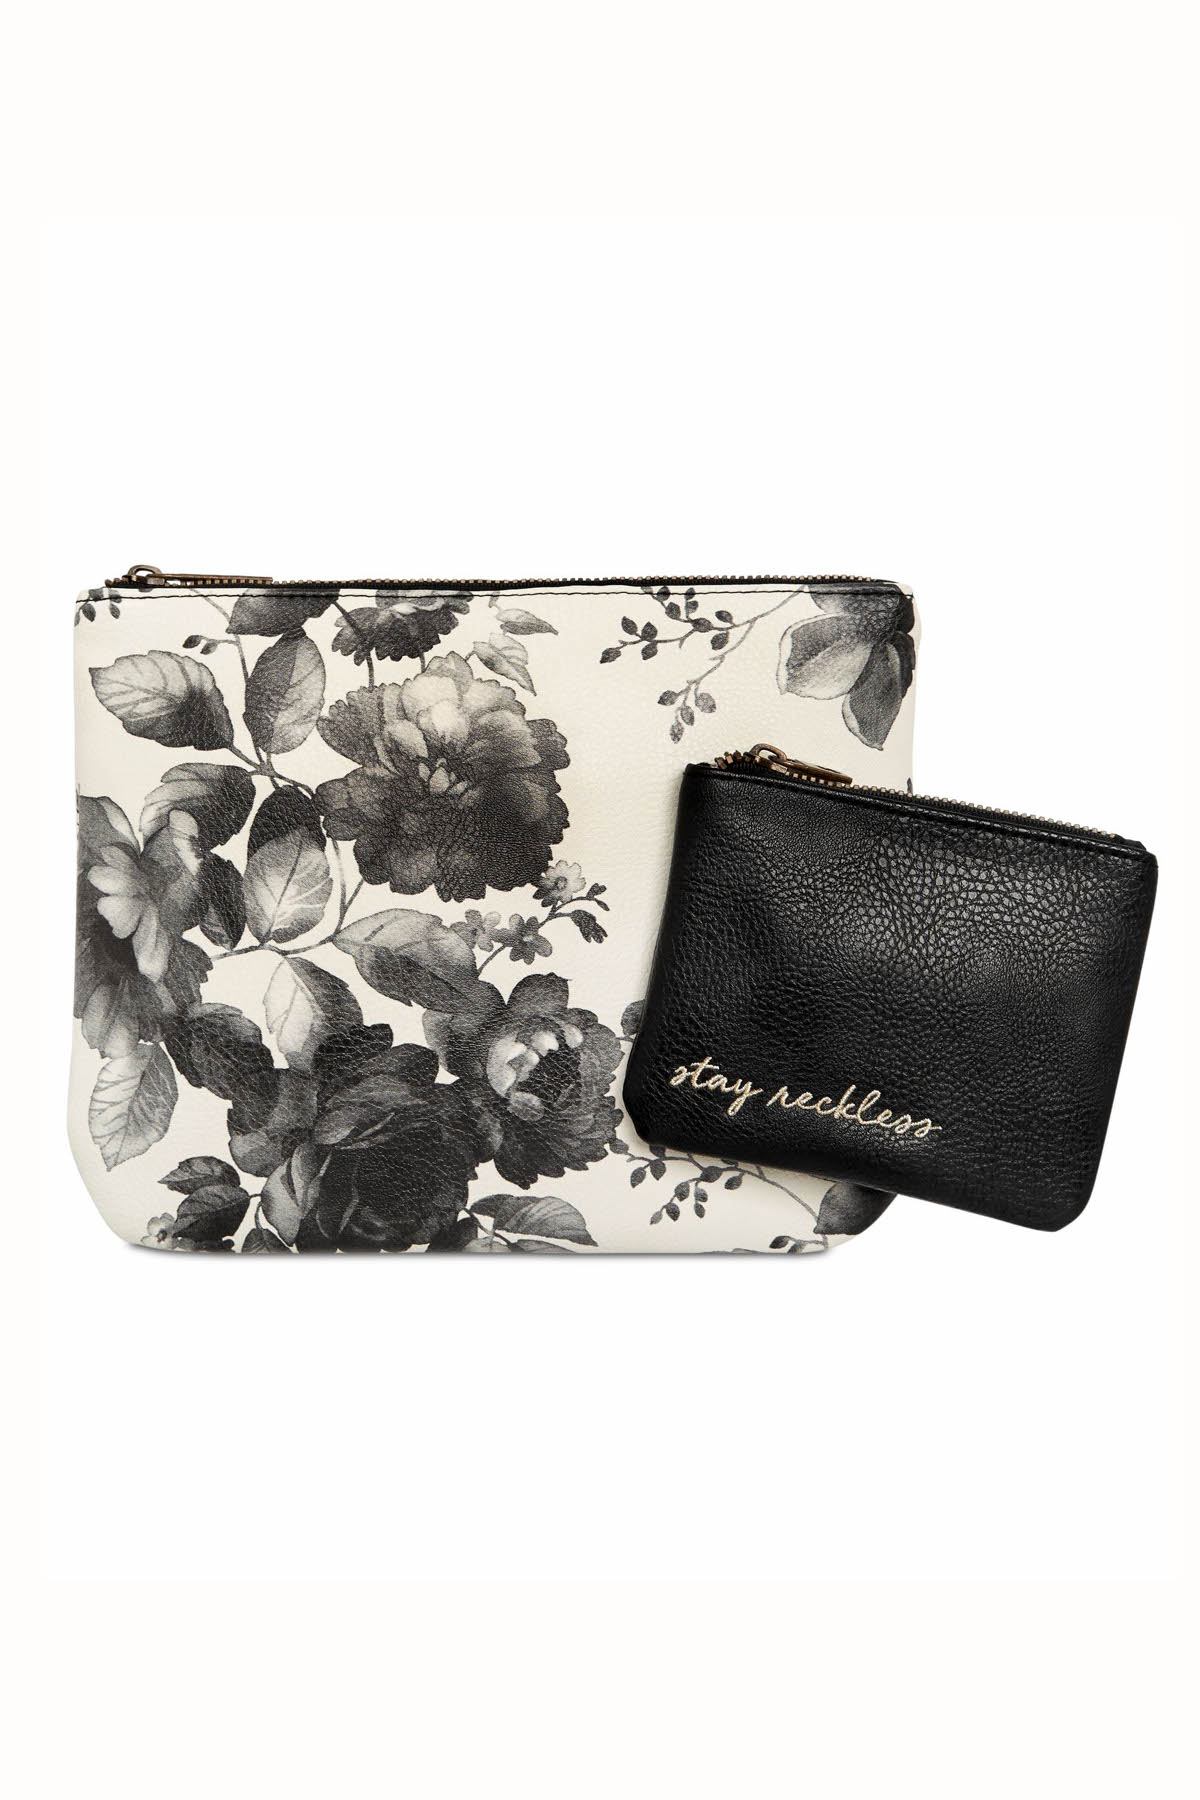 Lucky Brand Black/White Floral 2-Piece Cosmetic Pouch Duo